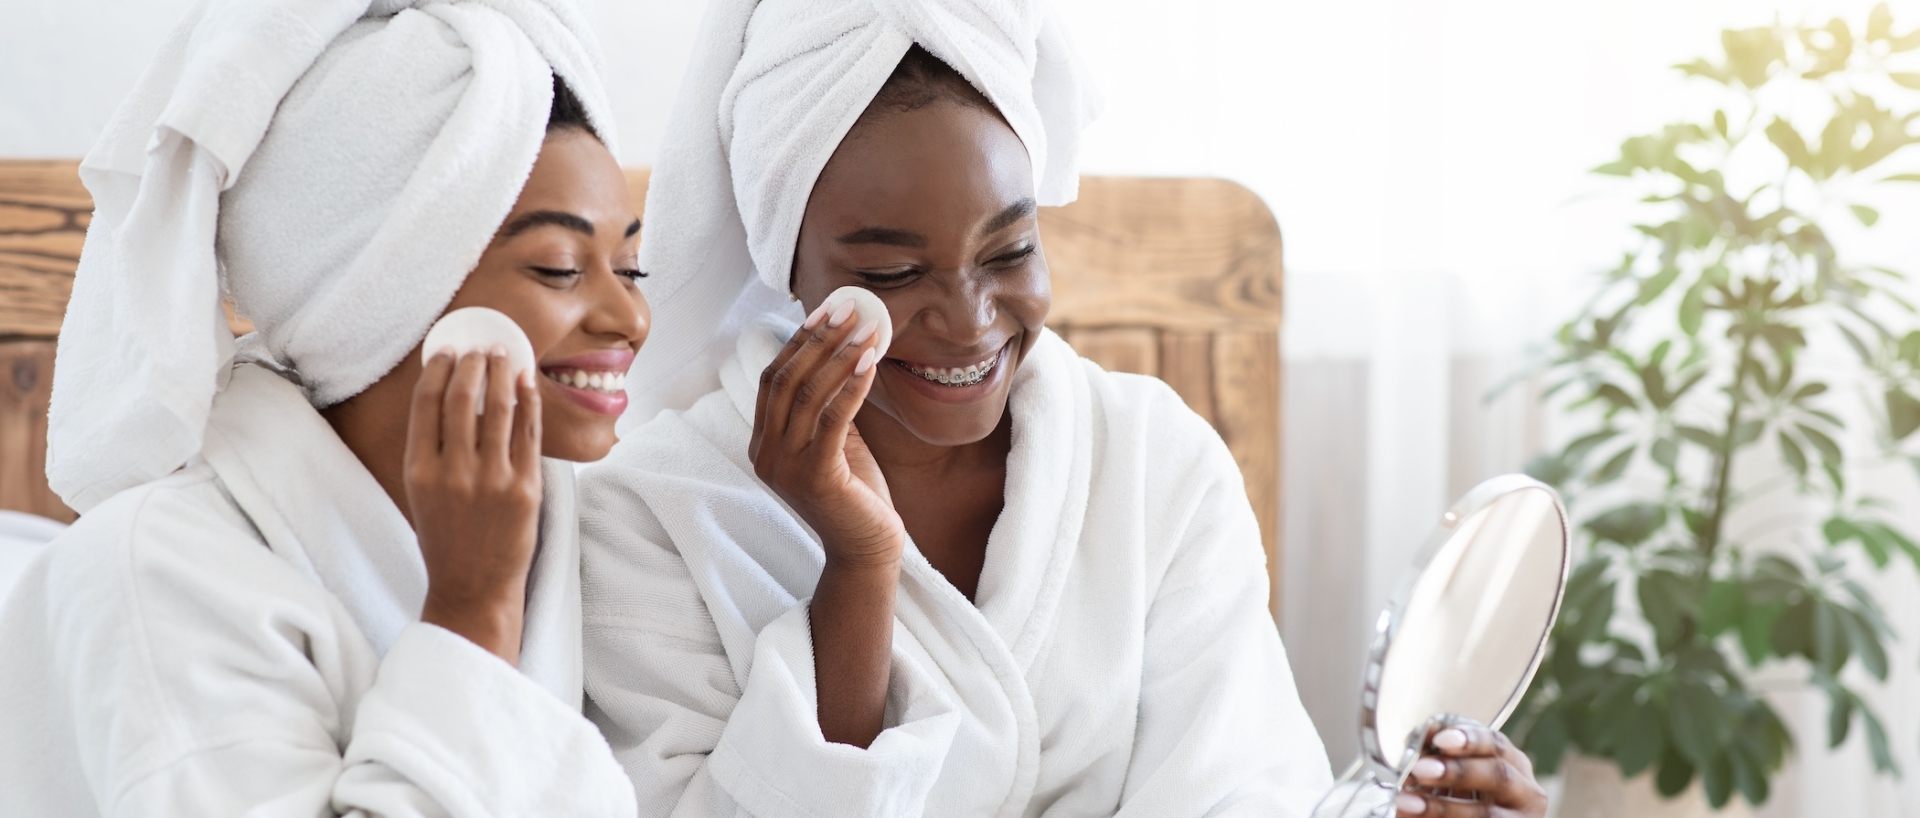 Smiling black female friends testing beauty products at home, using cotton pads, looking at mirror, bedroom interior, sun flare. African american ladies in bathrobes cleansing faces